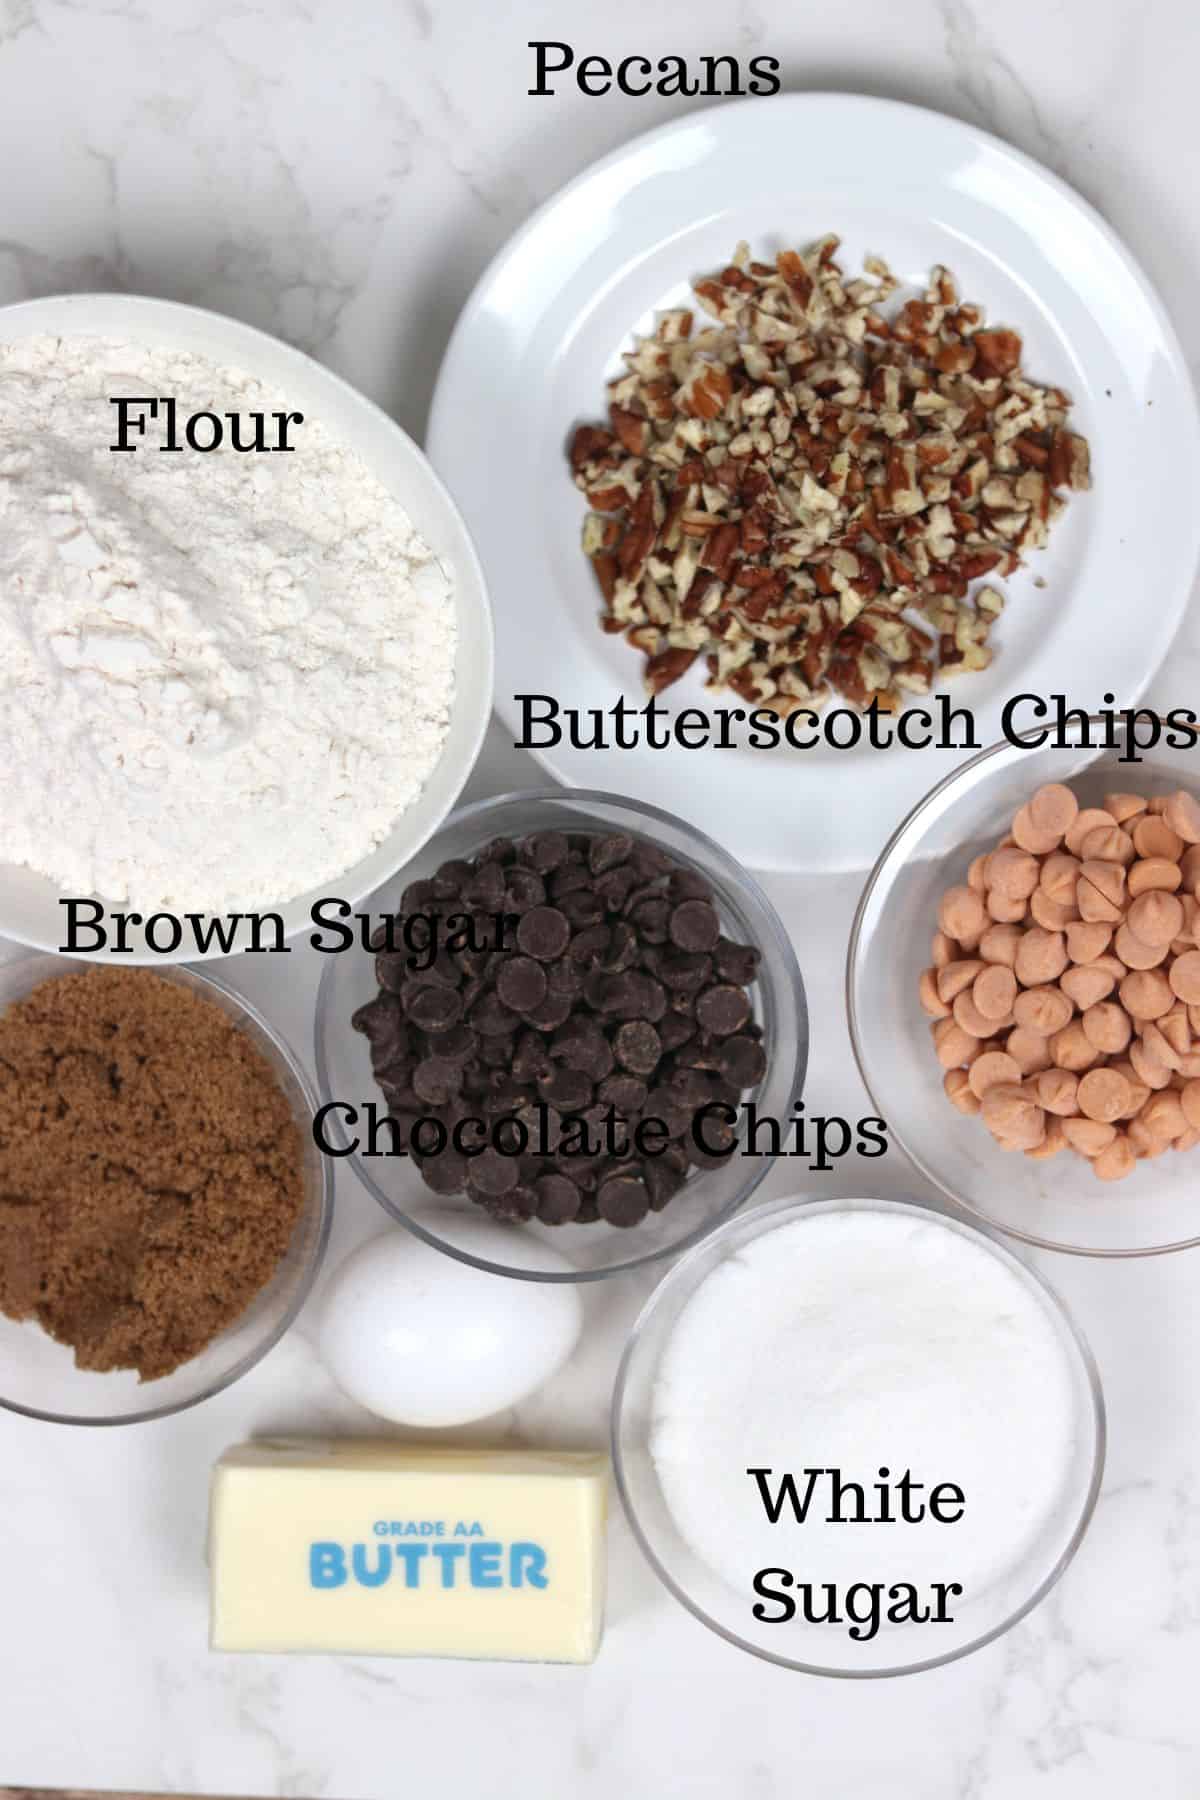 ingredients needed to make butterscotch and chocolate chip cookies